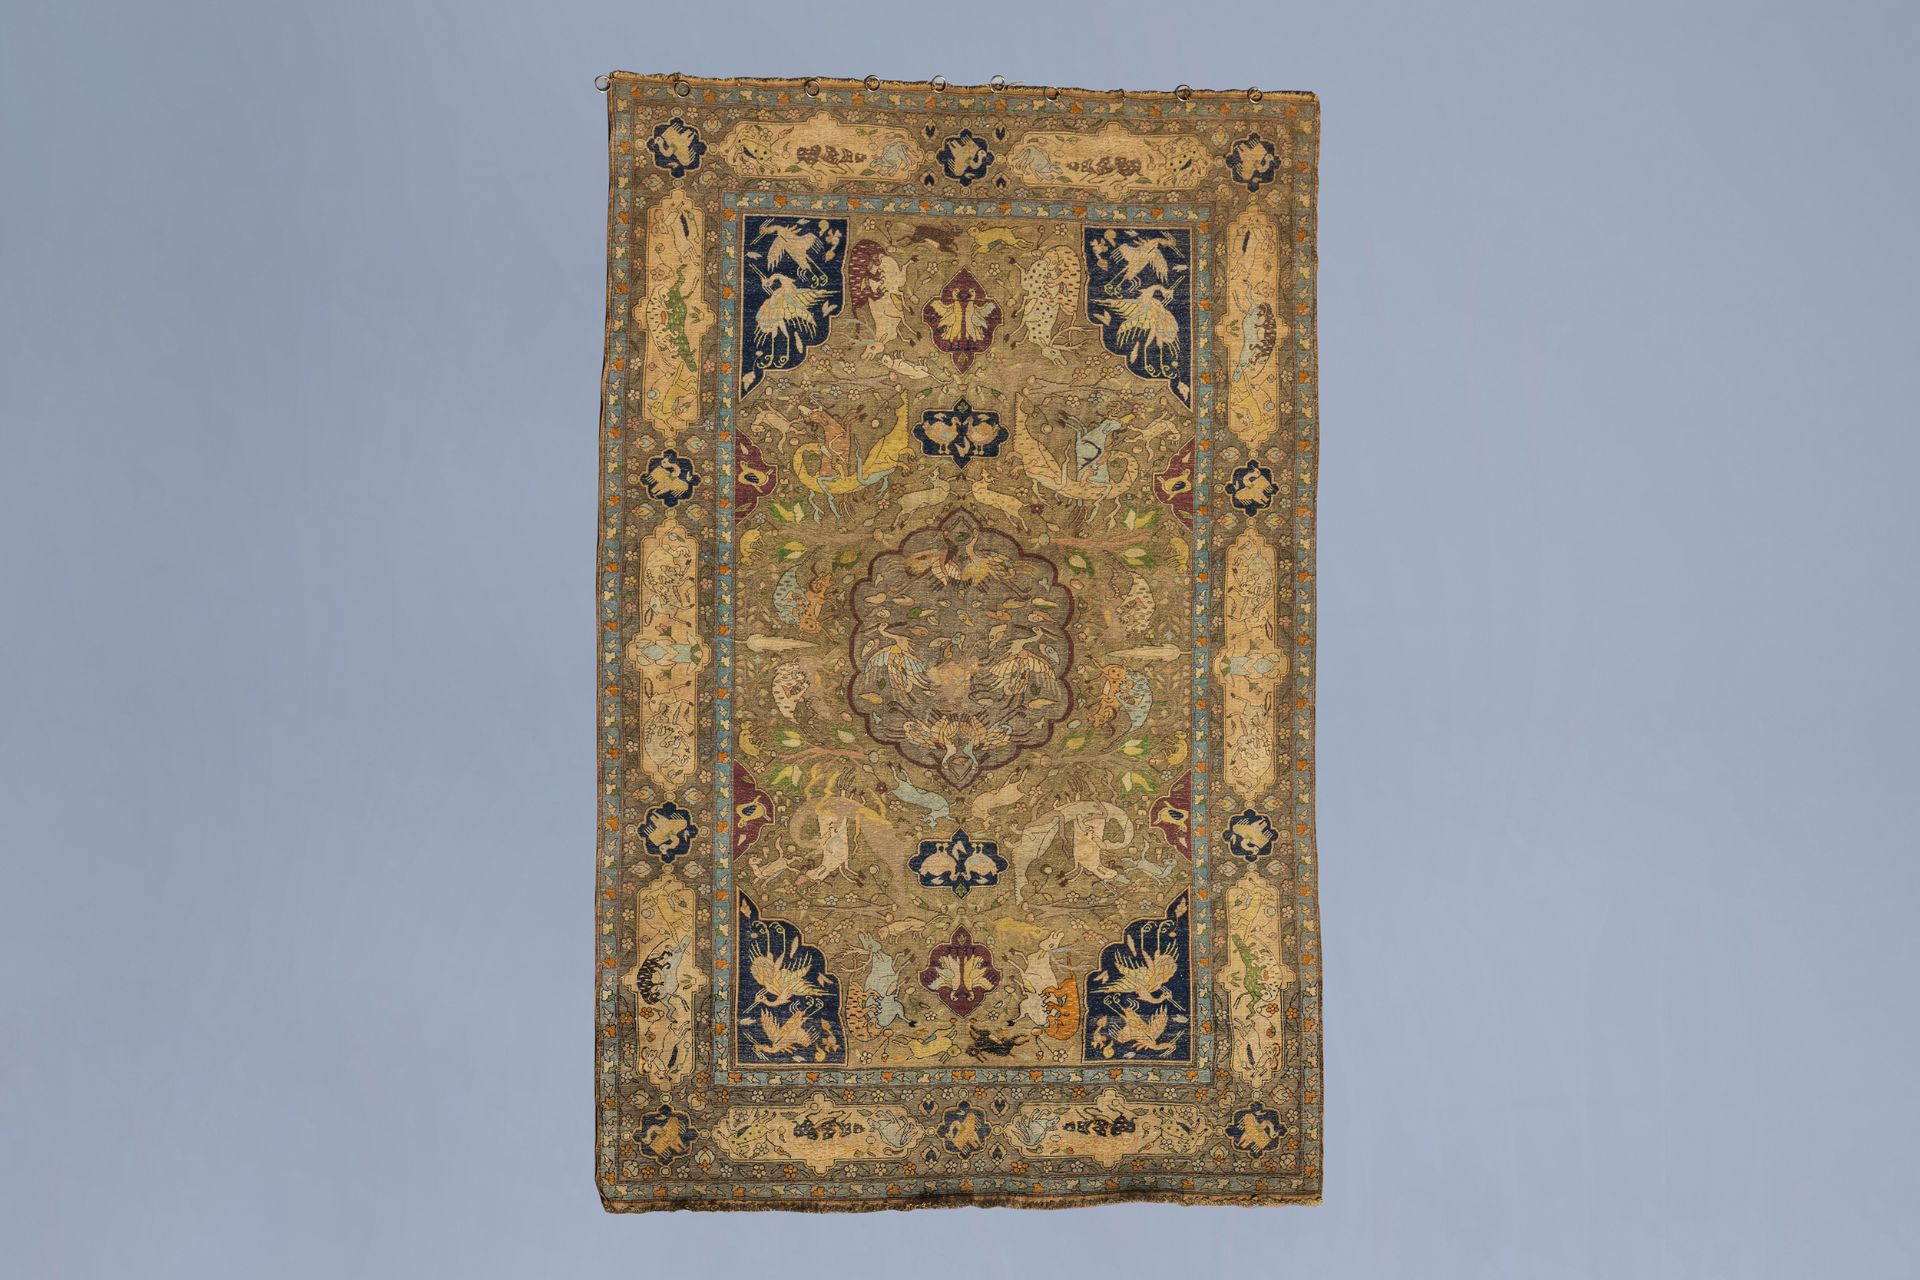 A lavish Oriental rug with animals and floral design, silk and gold thread on cotton, 19th C. - Image 3 of 4